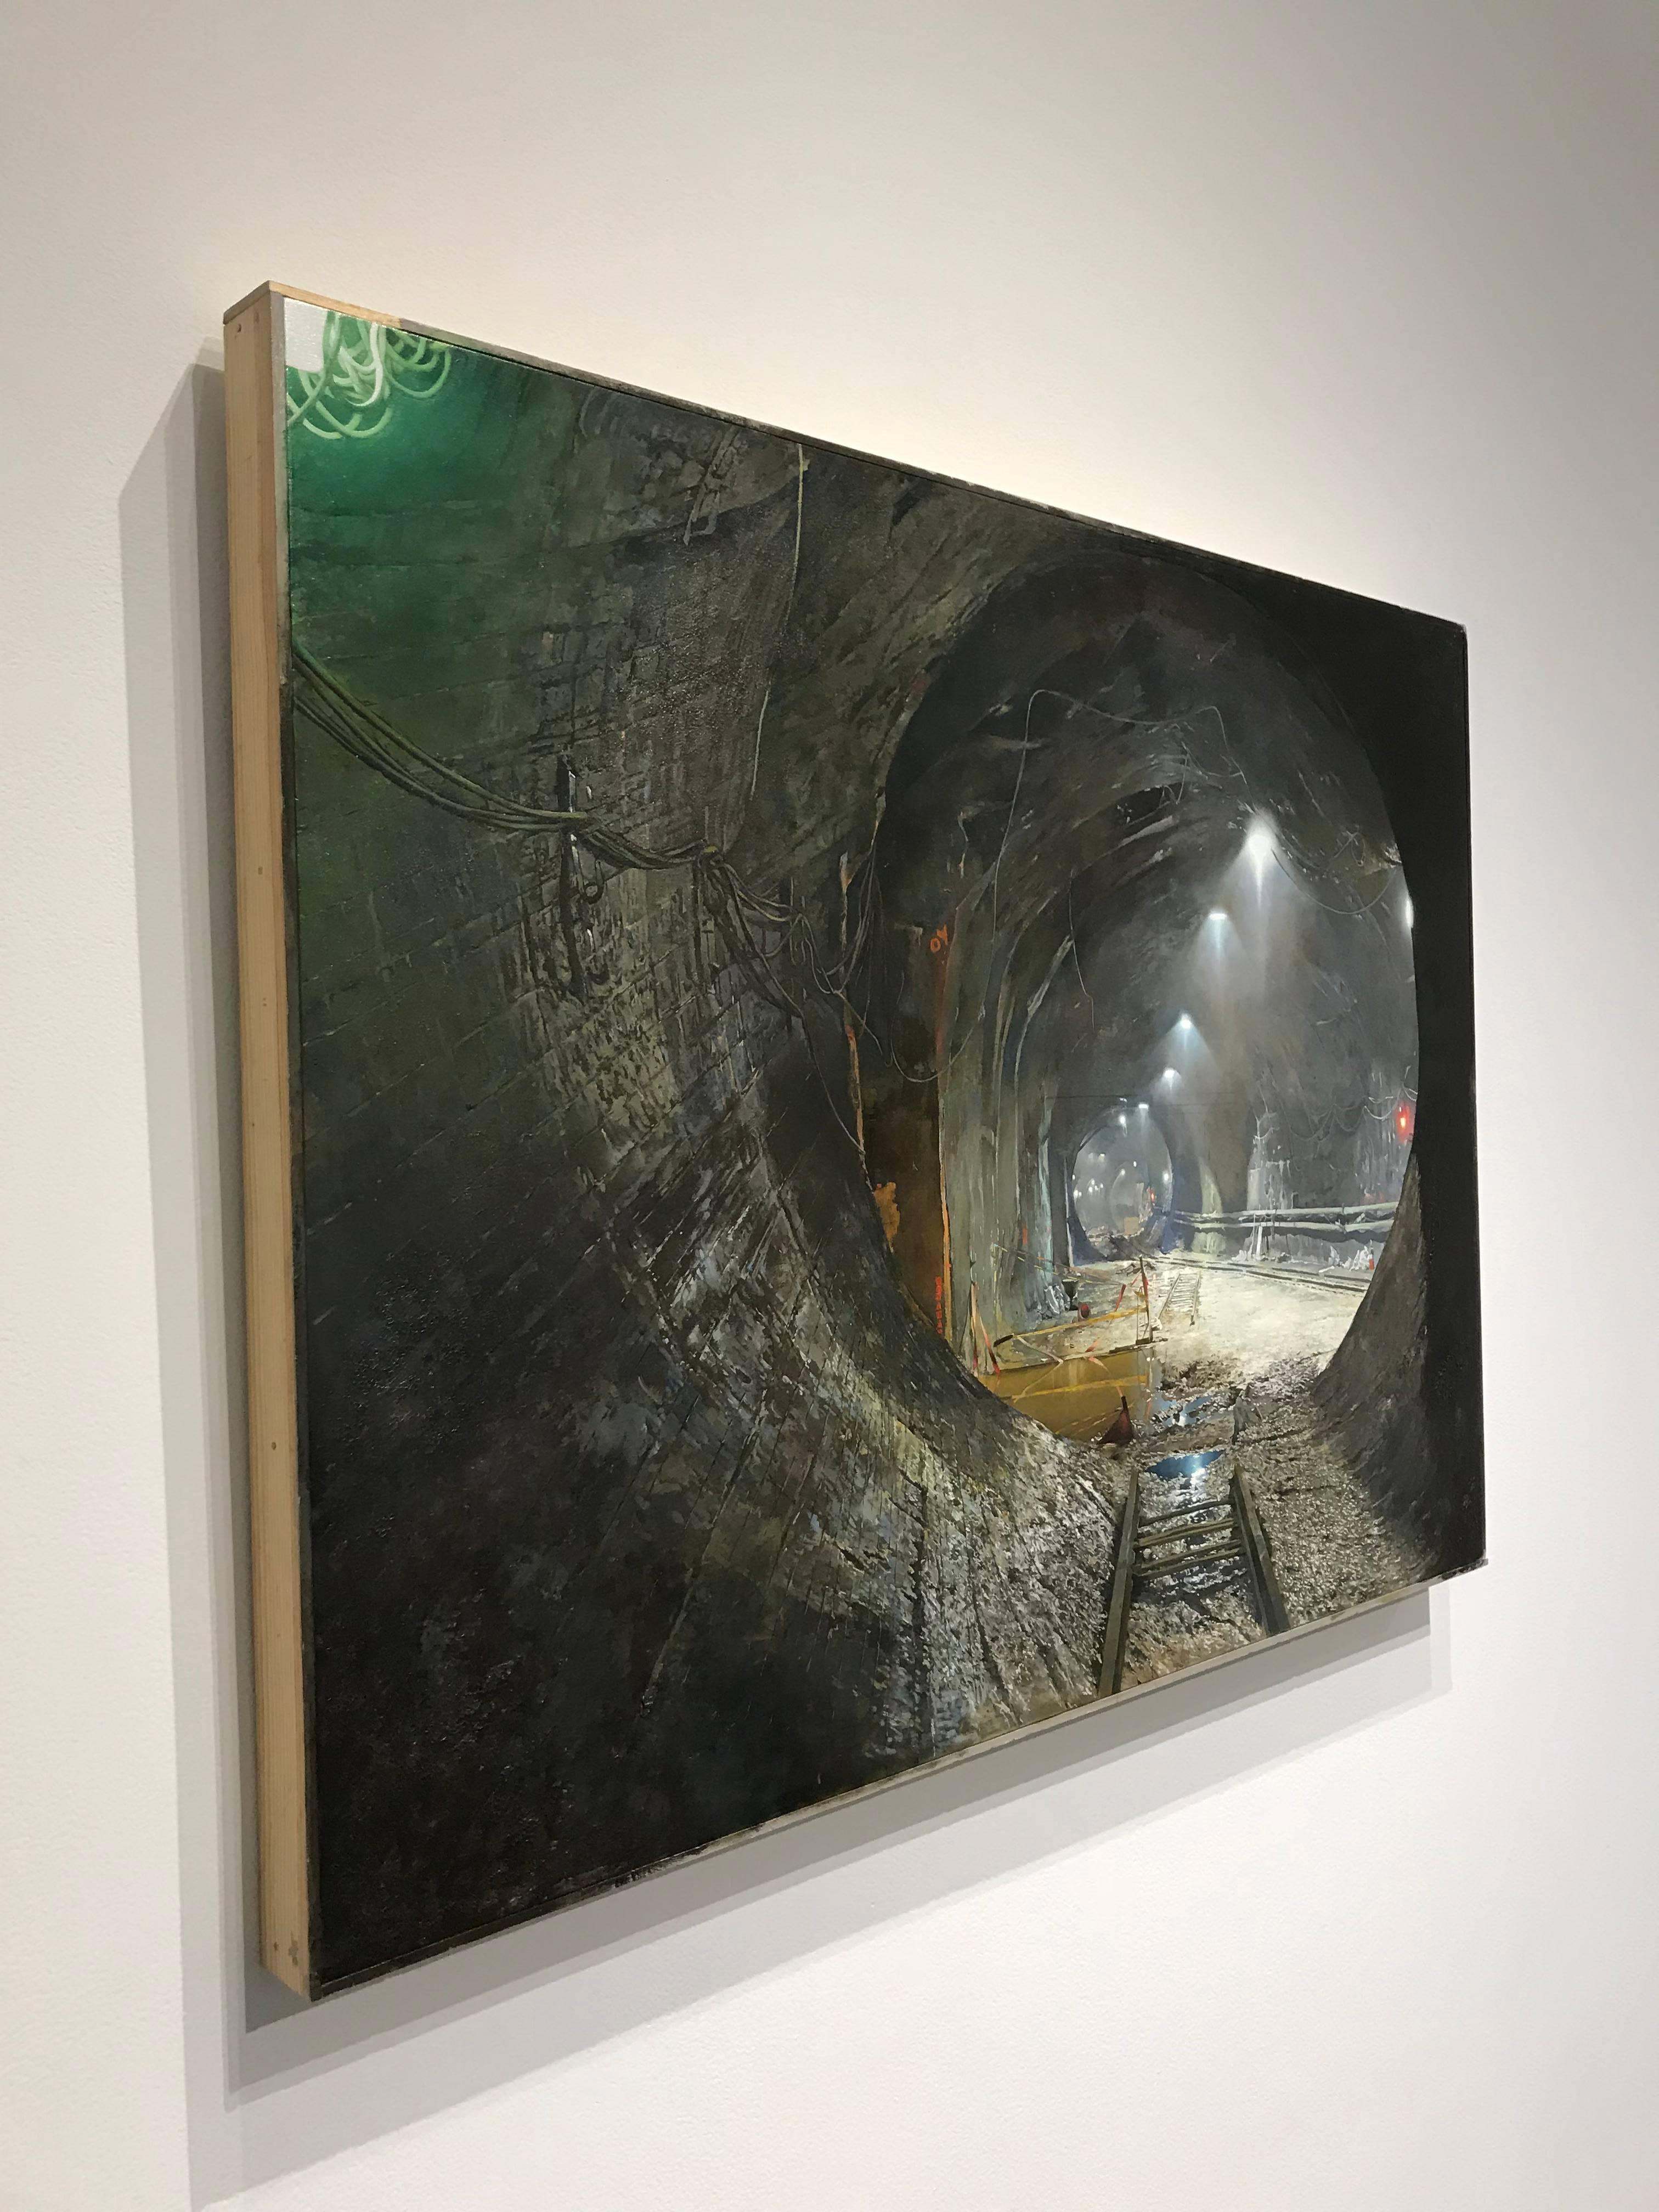 EAST SIDE ACCESS TUNNEL UNDER CONSTRUCTION - Painting by Joseph McNamara